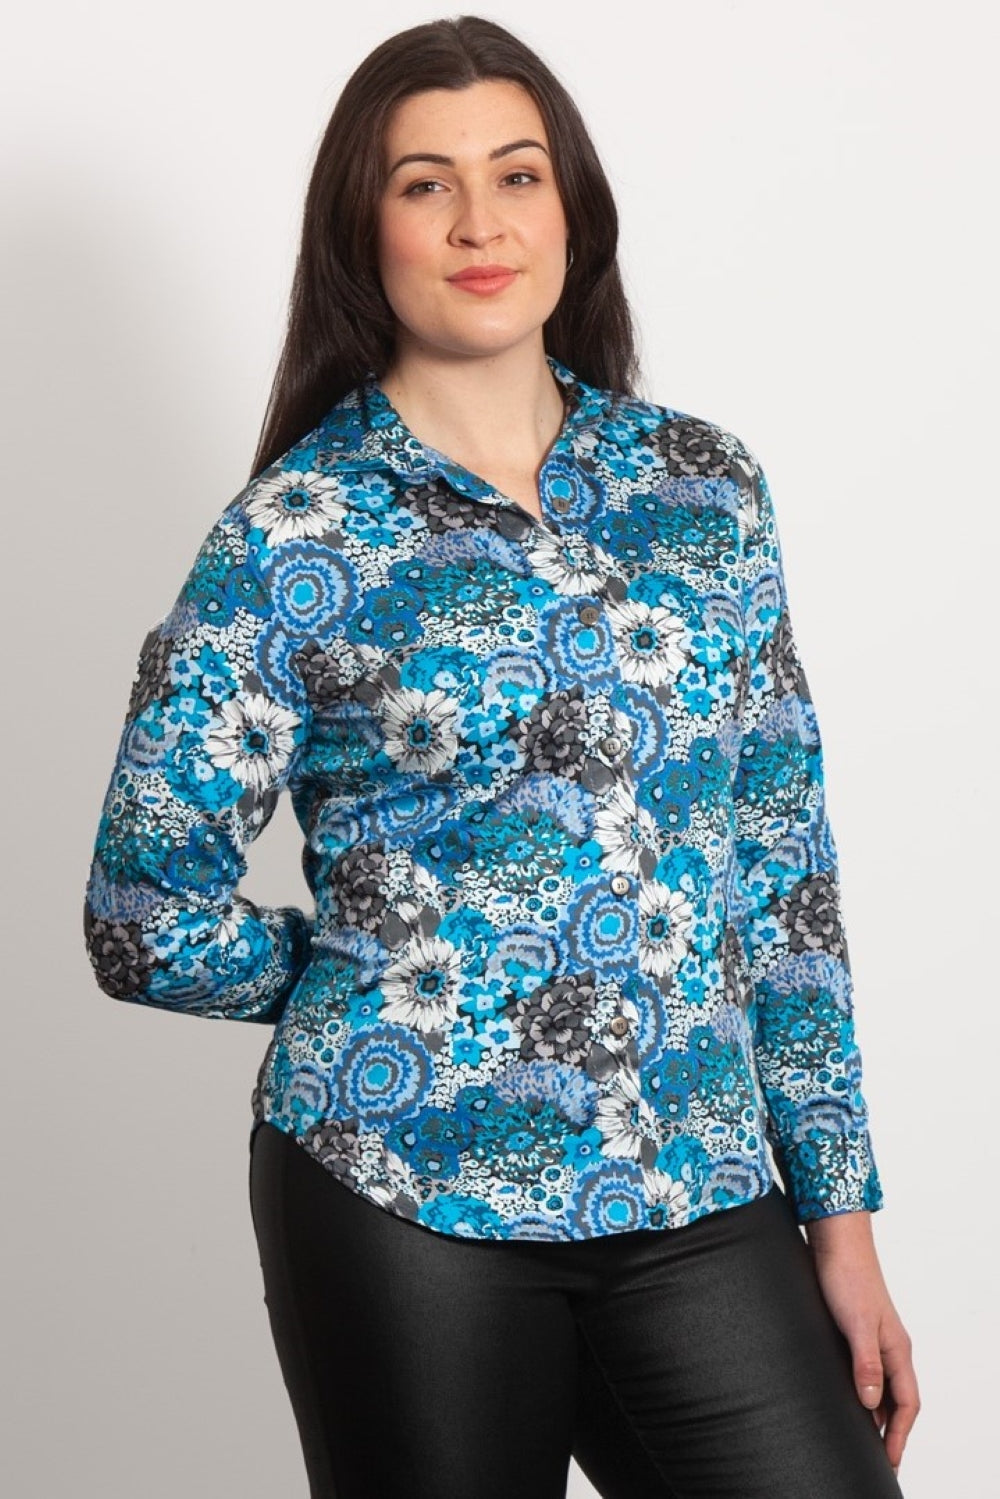 100% Cotton - Long Sleeve Blouse aSTERbLUES